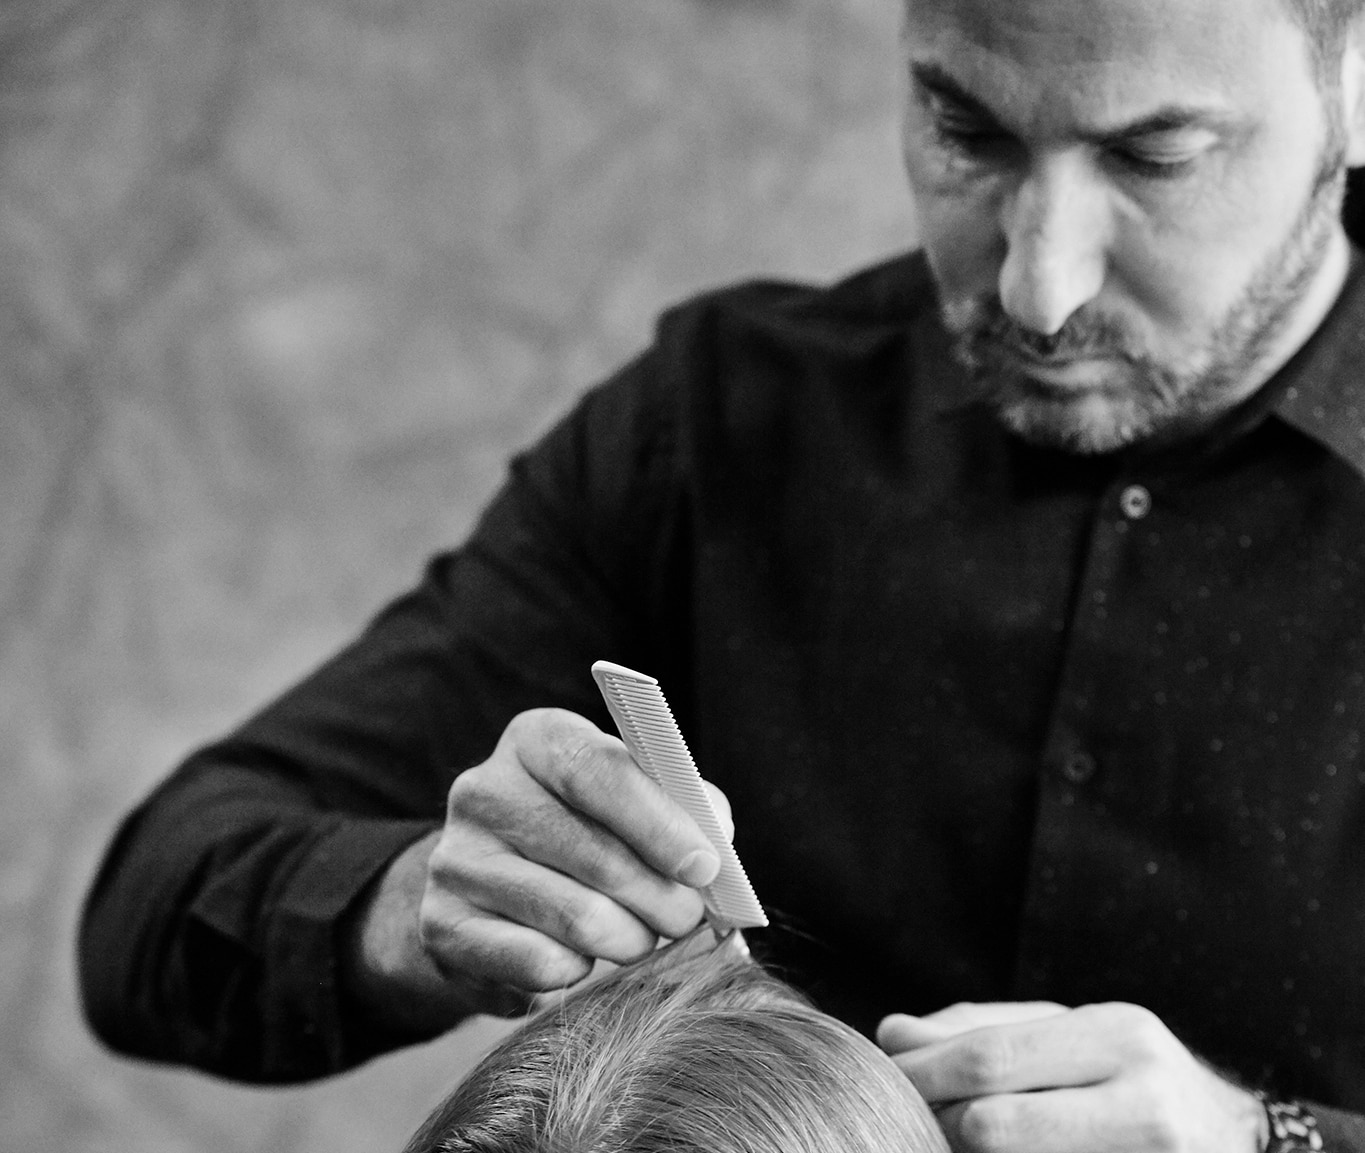 Chris Naselli styling a model's hair with a comb